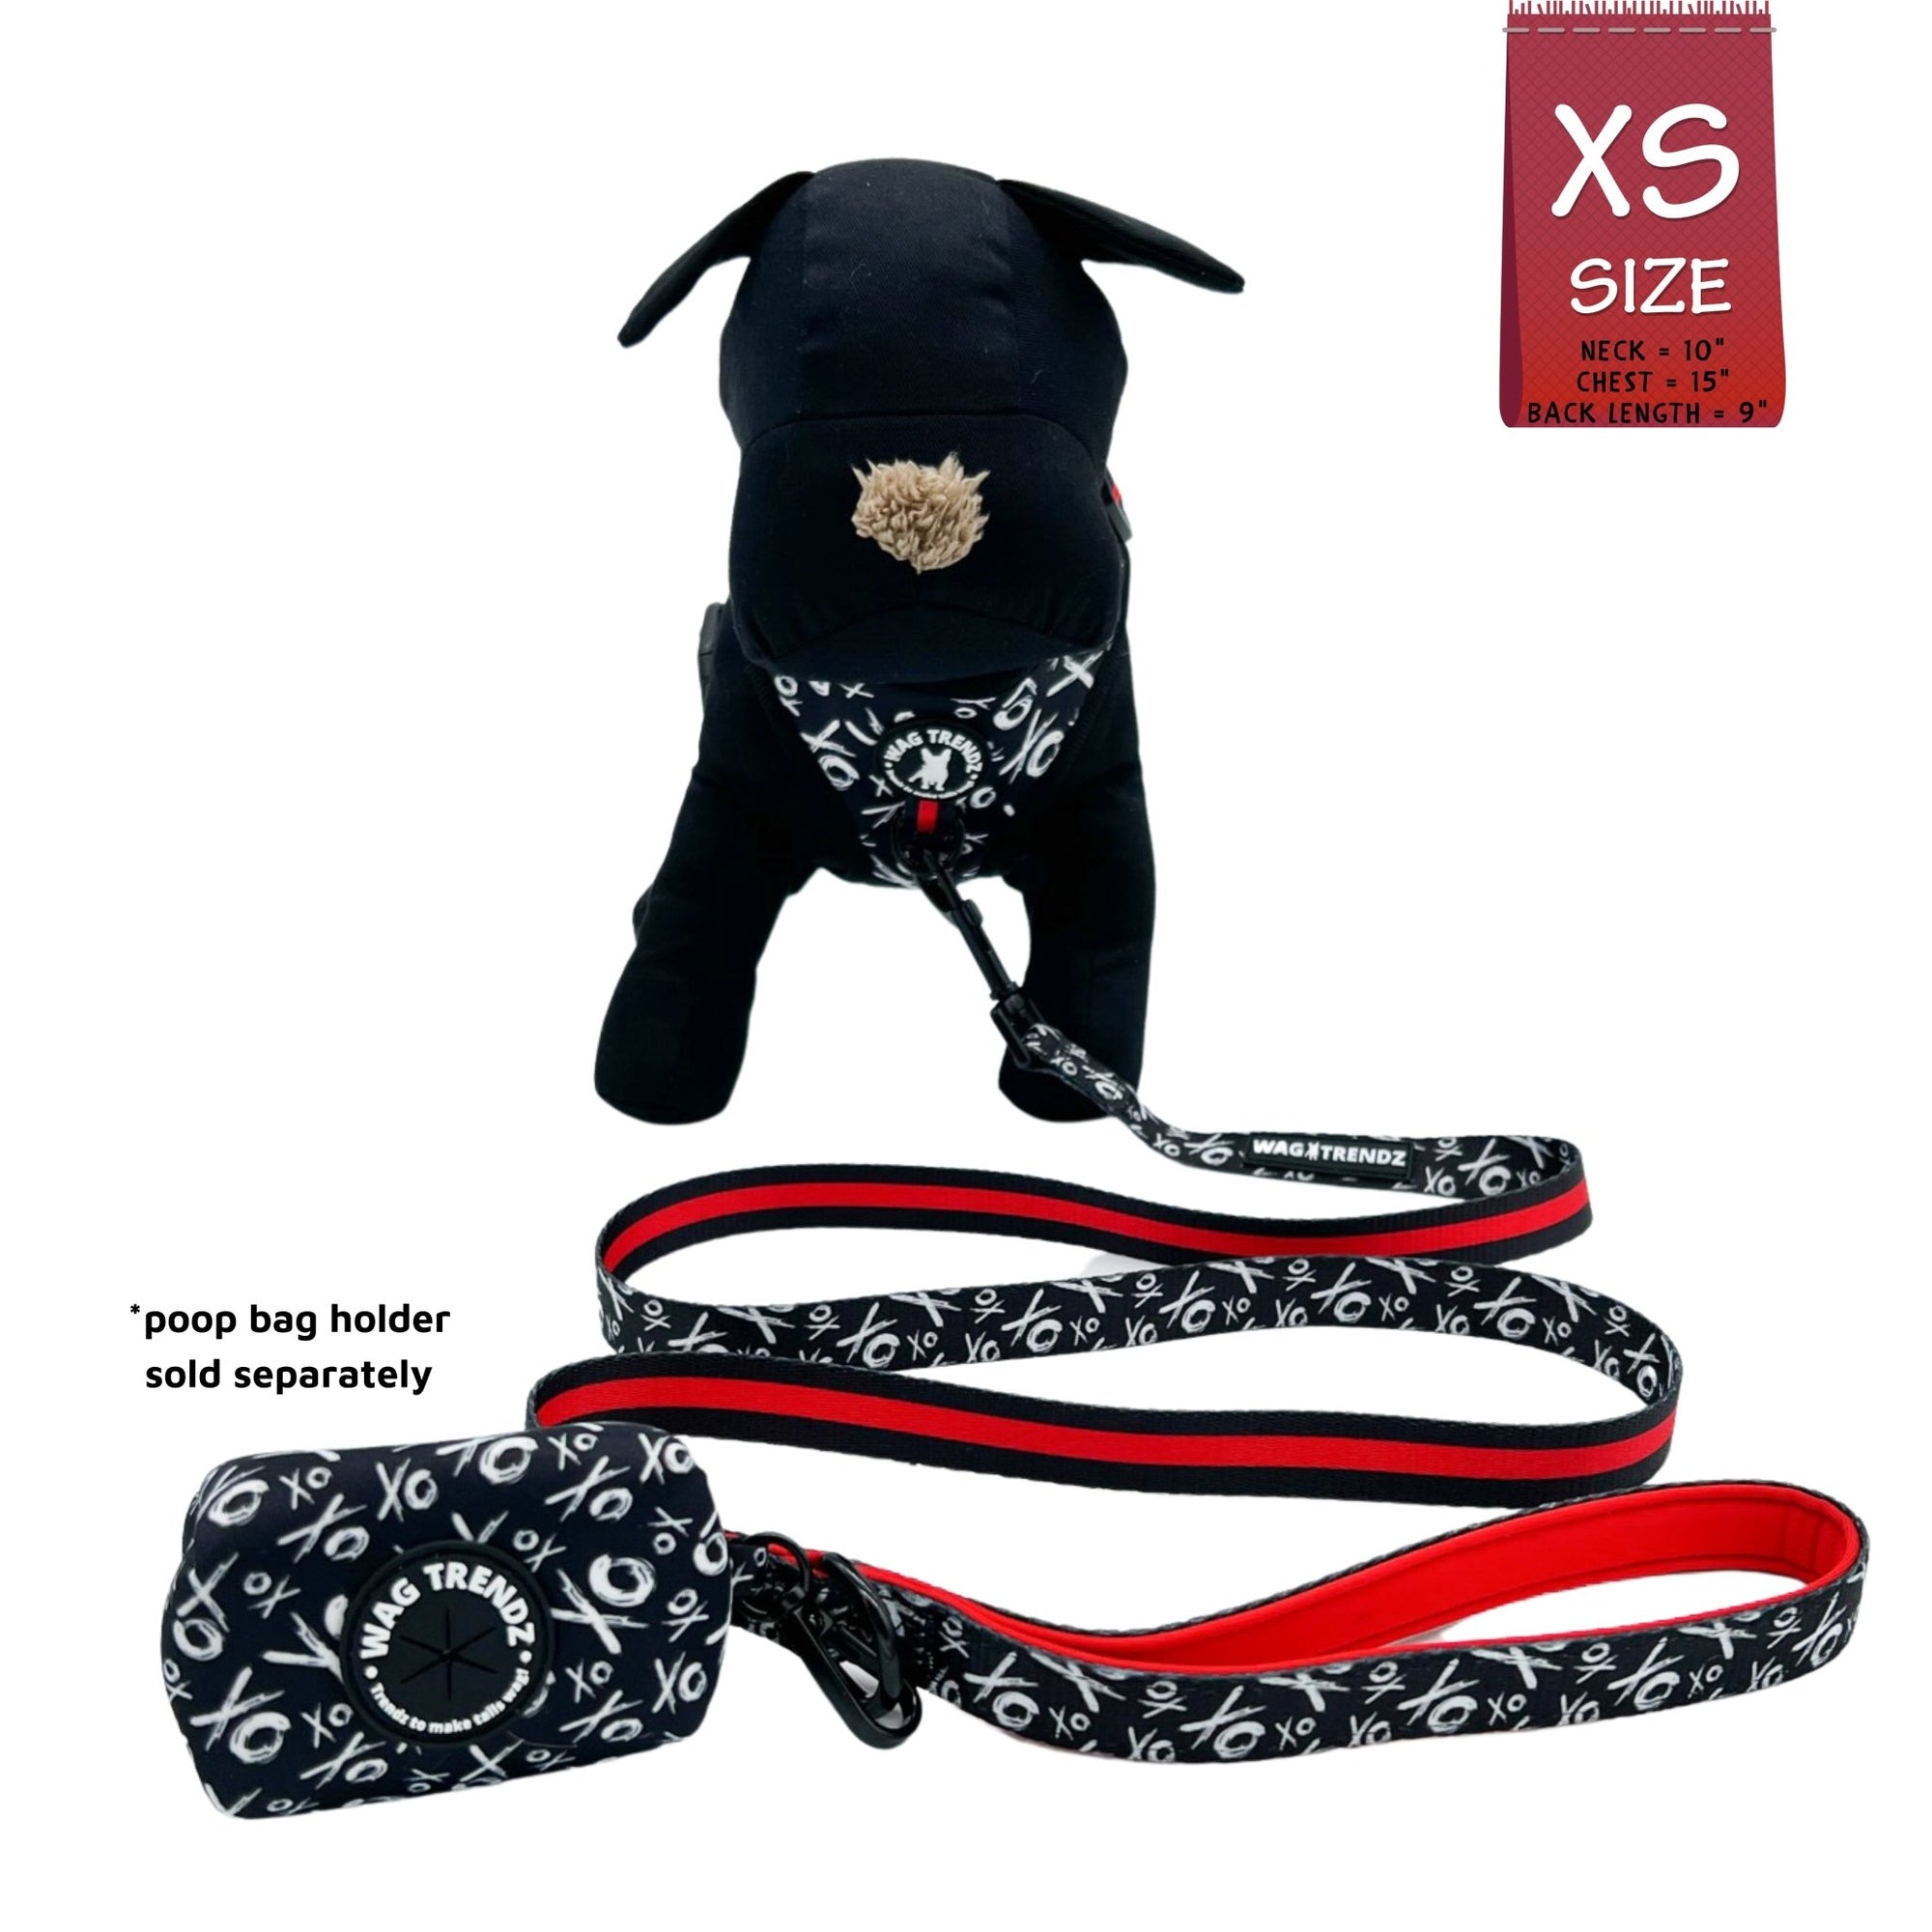 Dog Leash and Harness Set - Stuffed Black Dog wearing XS Dog Harness Vest - black and white XO&#39;s with bold red accents with matching leash and poop bag holder attached - against solid white background - Wag Trendz